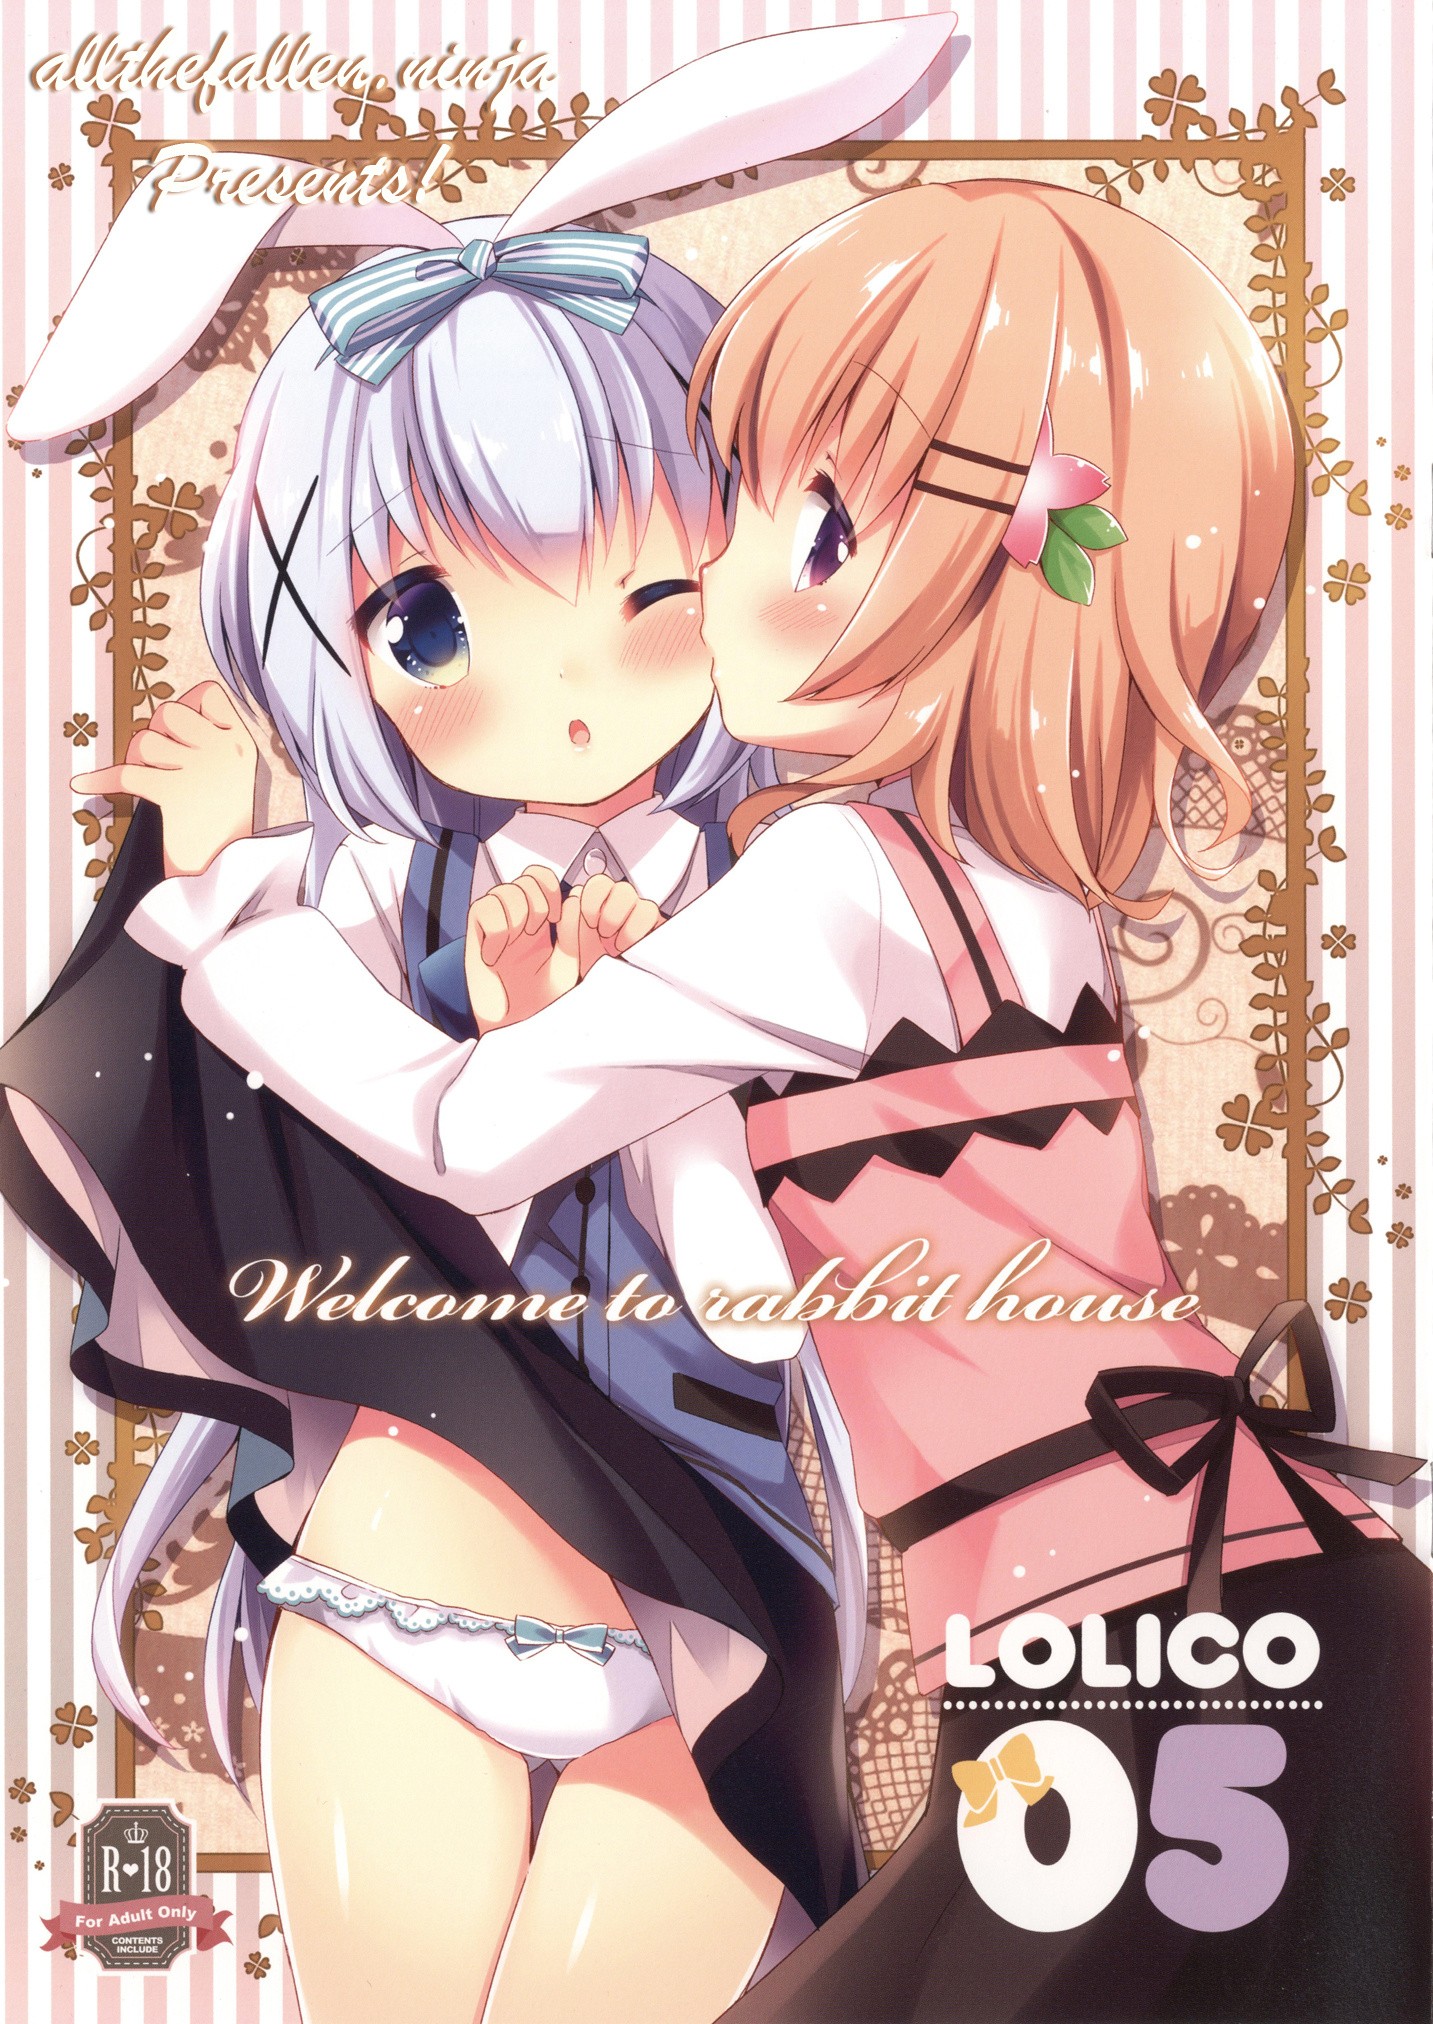 Welcome to rabbit house LoliCo05 hentai manga picture 1